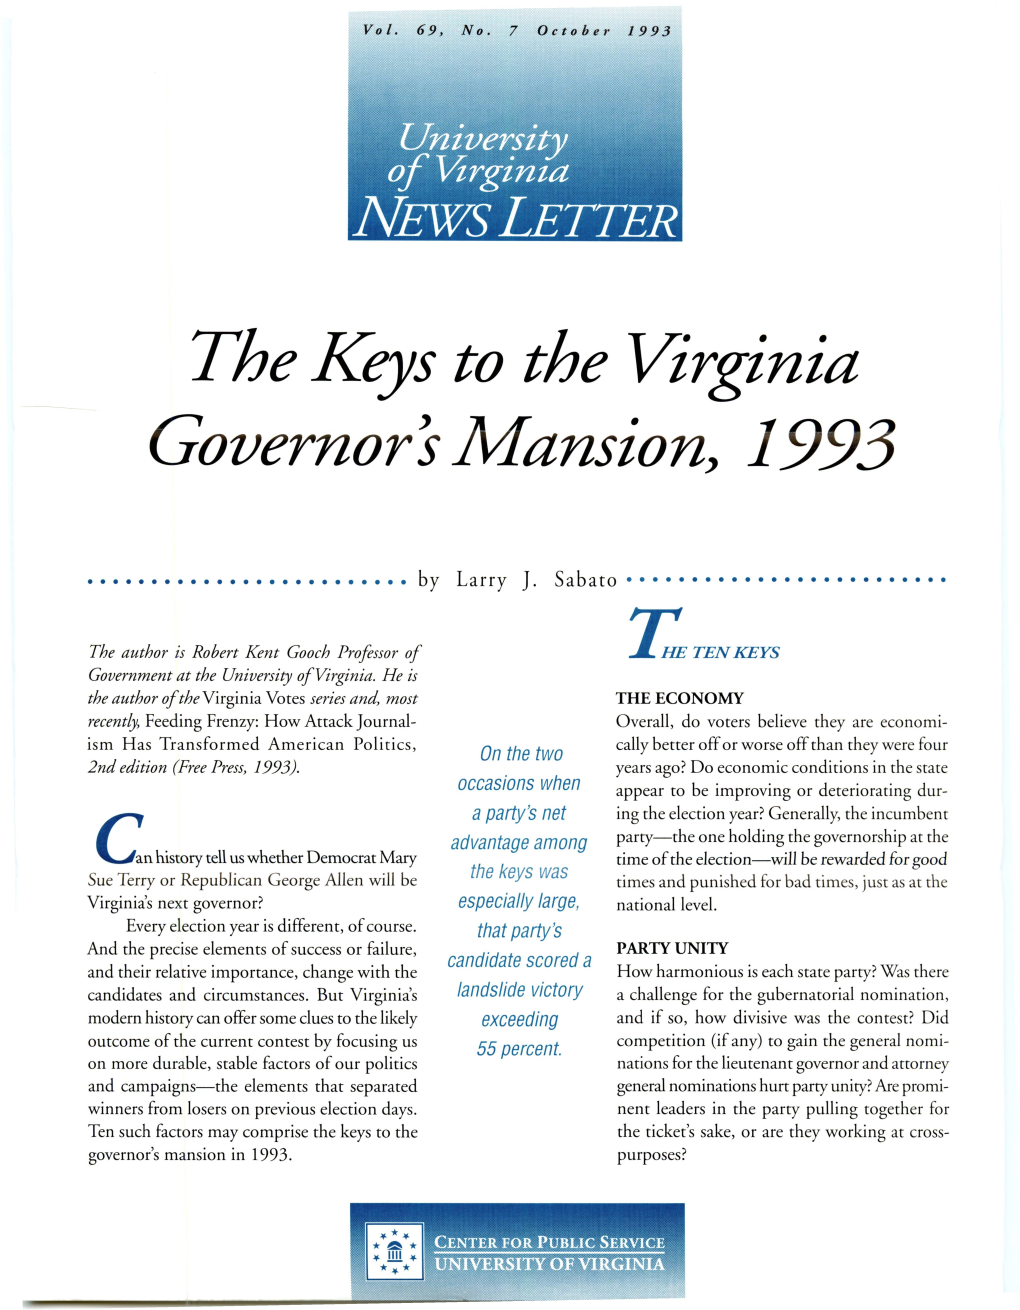 The Keys to the Virginia Governor'smansion, 1993